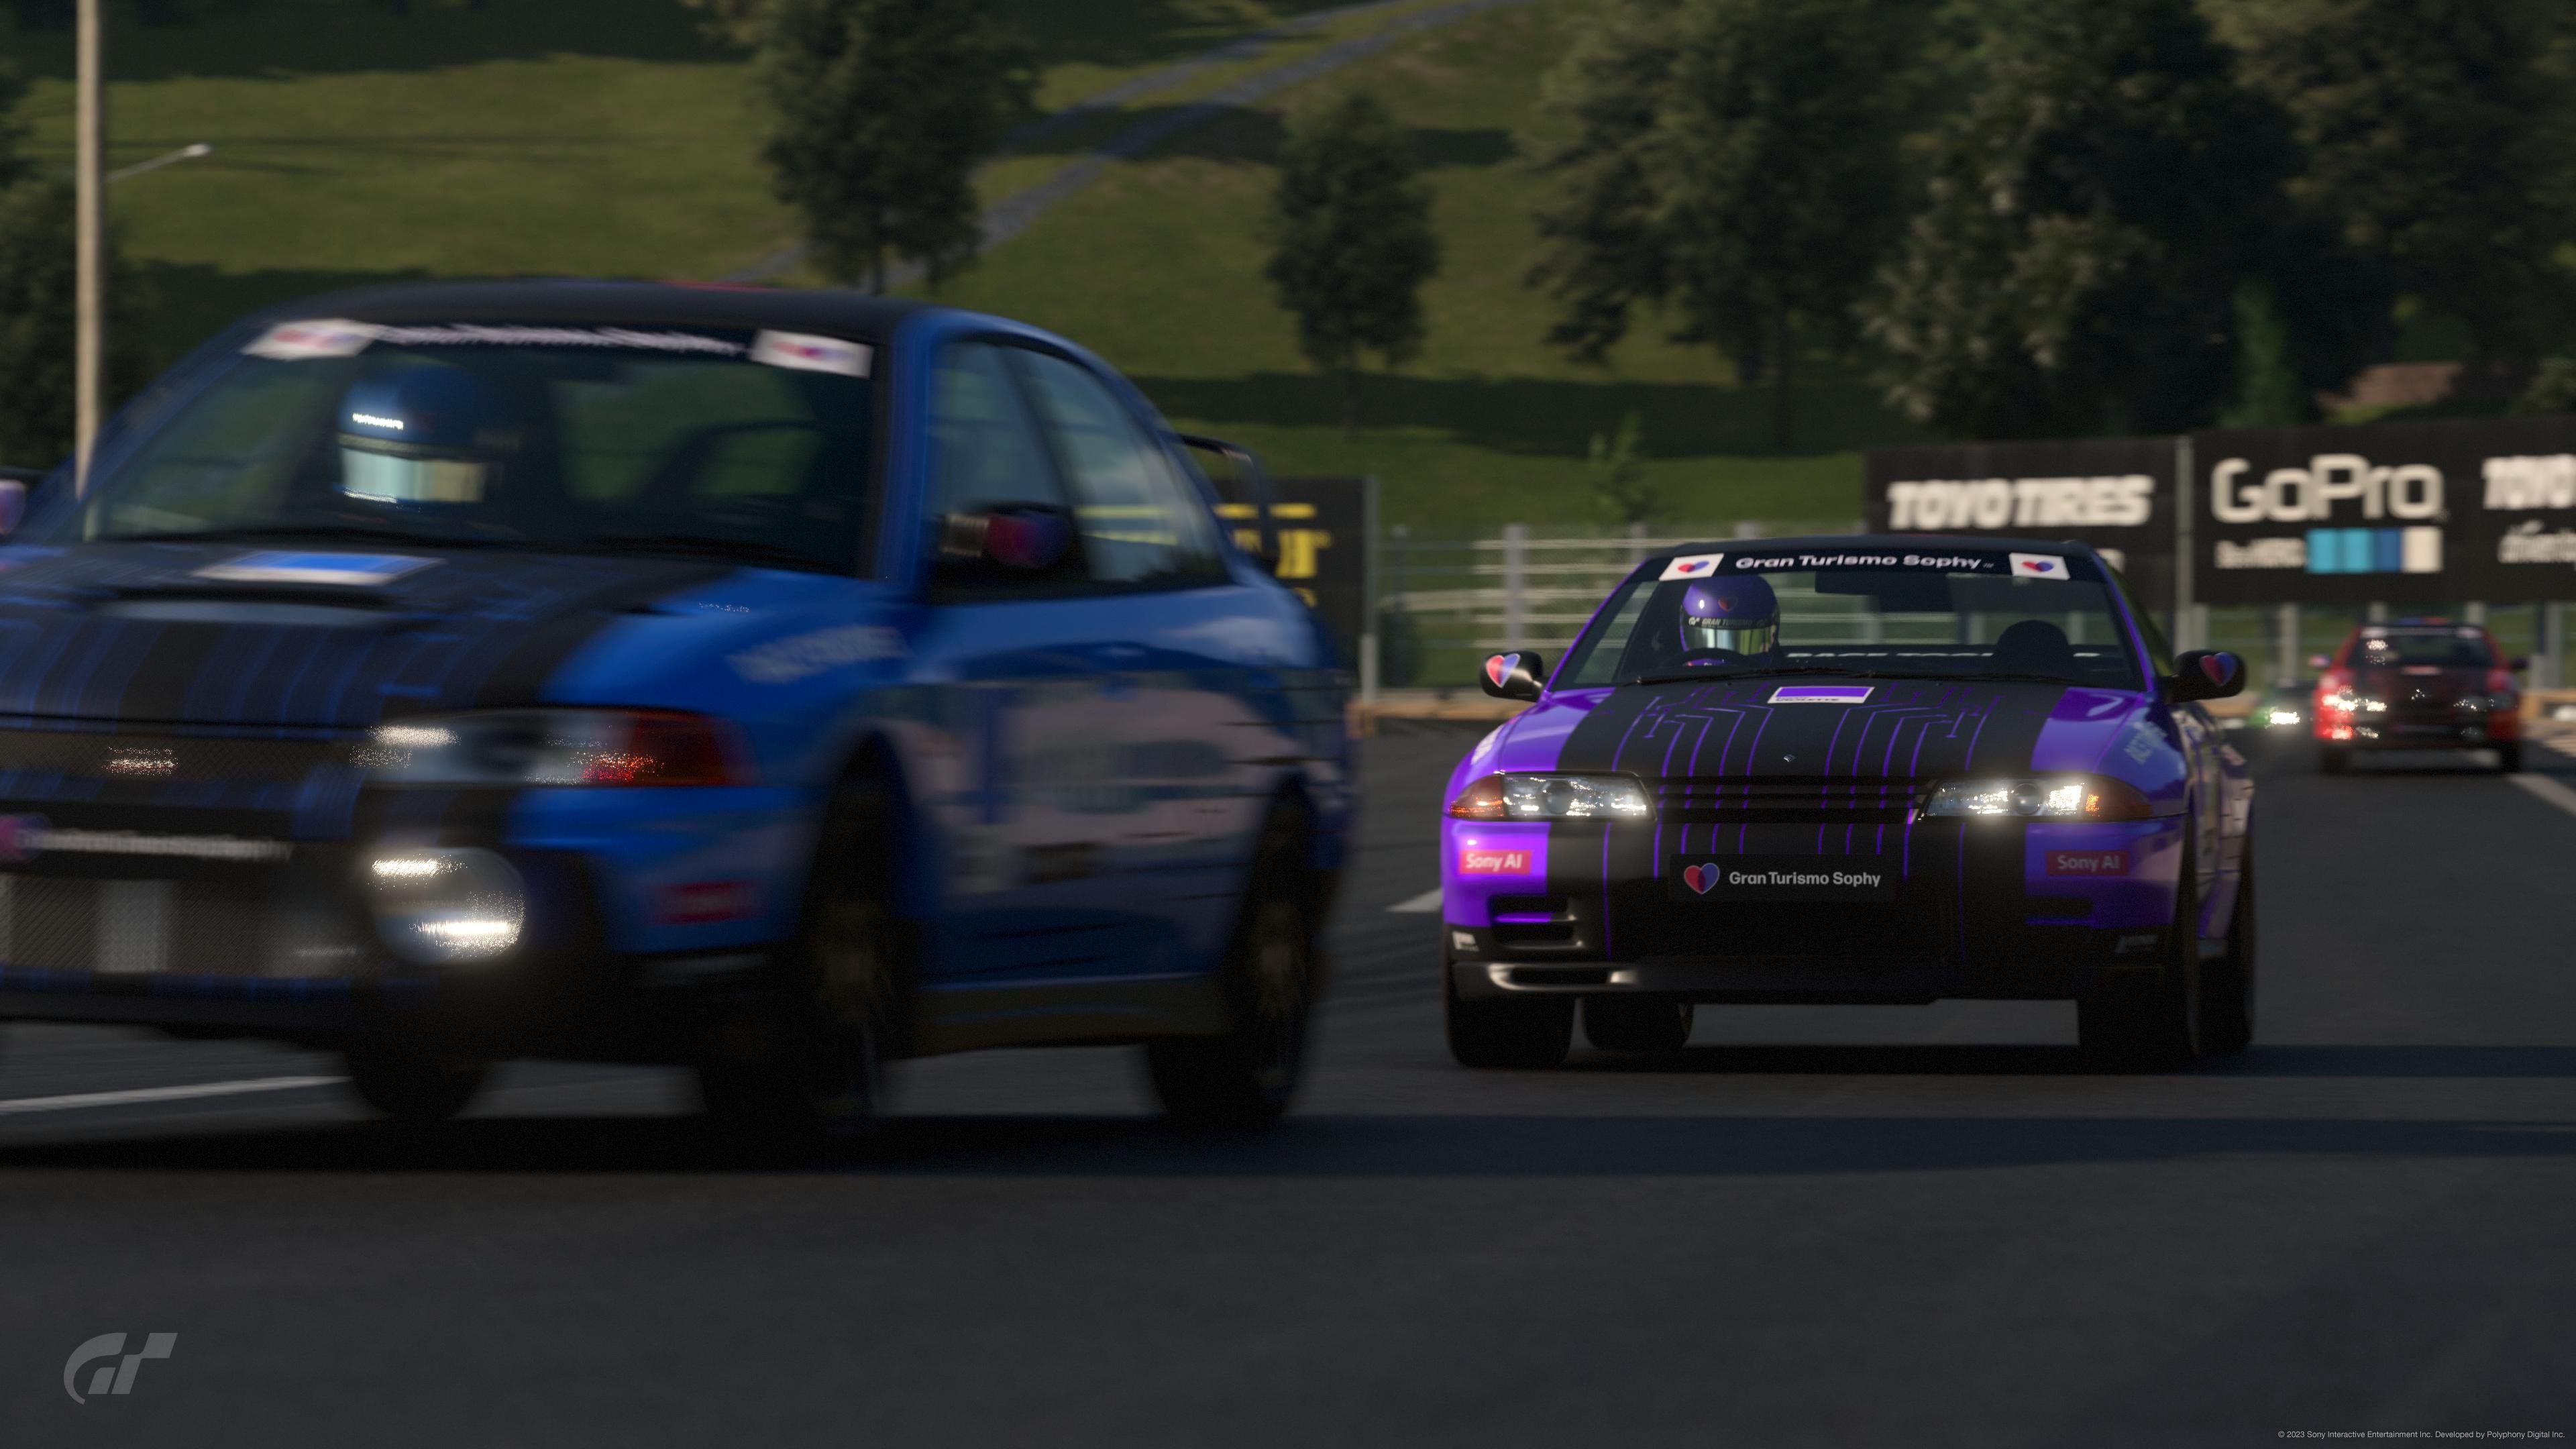 New Gran Turismo 7 Update Brings Back Grand Valley, Pits You Against Superhuman AI